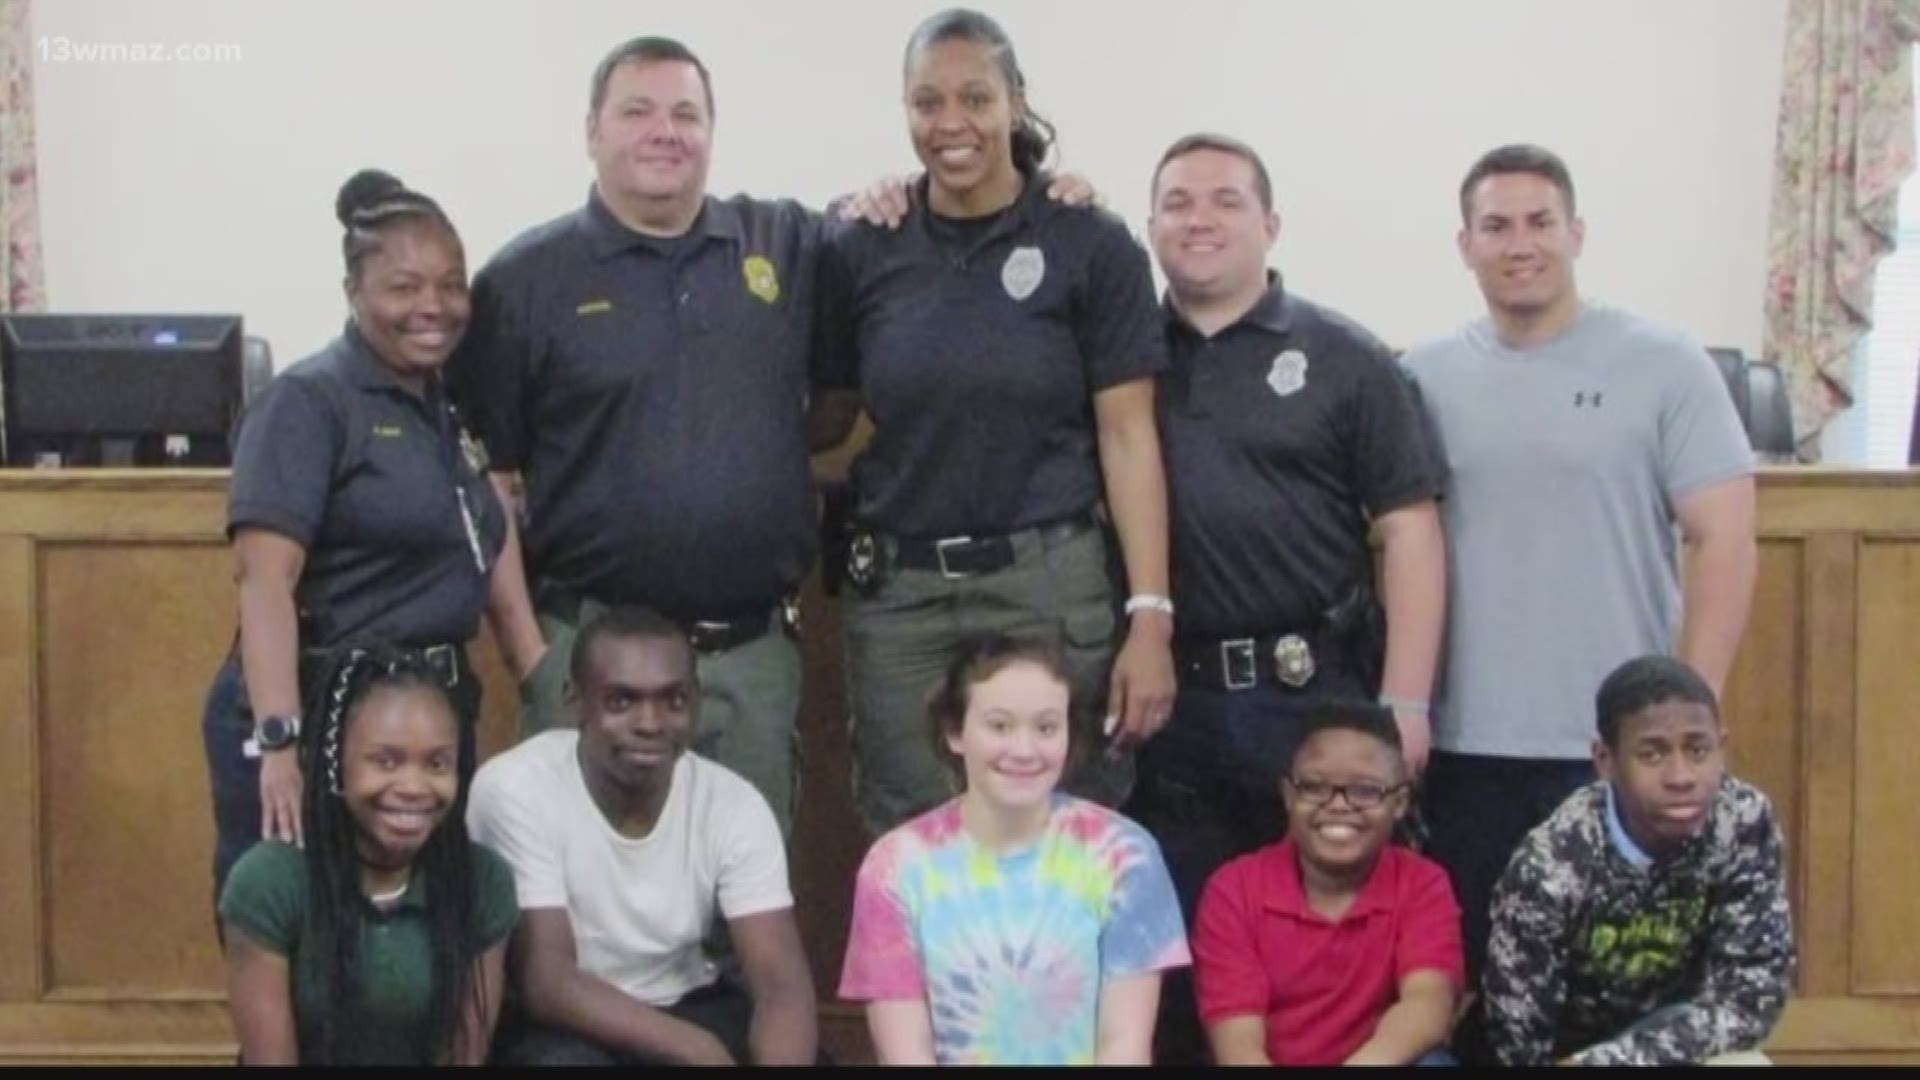 Members of the Milledgeville Police Department are looking to curb the number of kids in their communities who end up on the wrong path, and they're taking the hands-on approach to do it through mentorship.